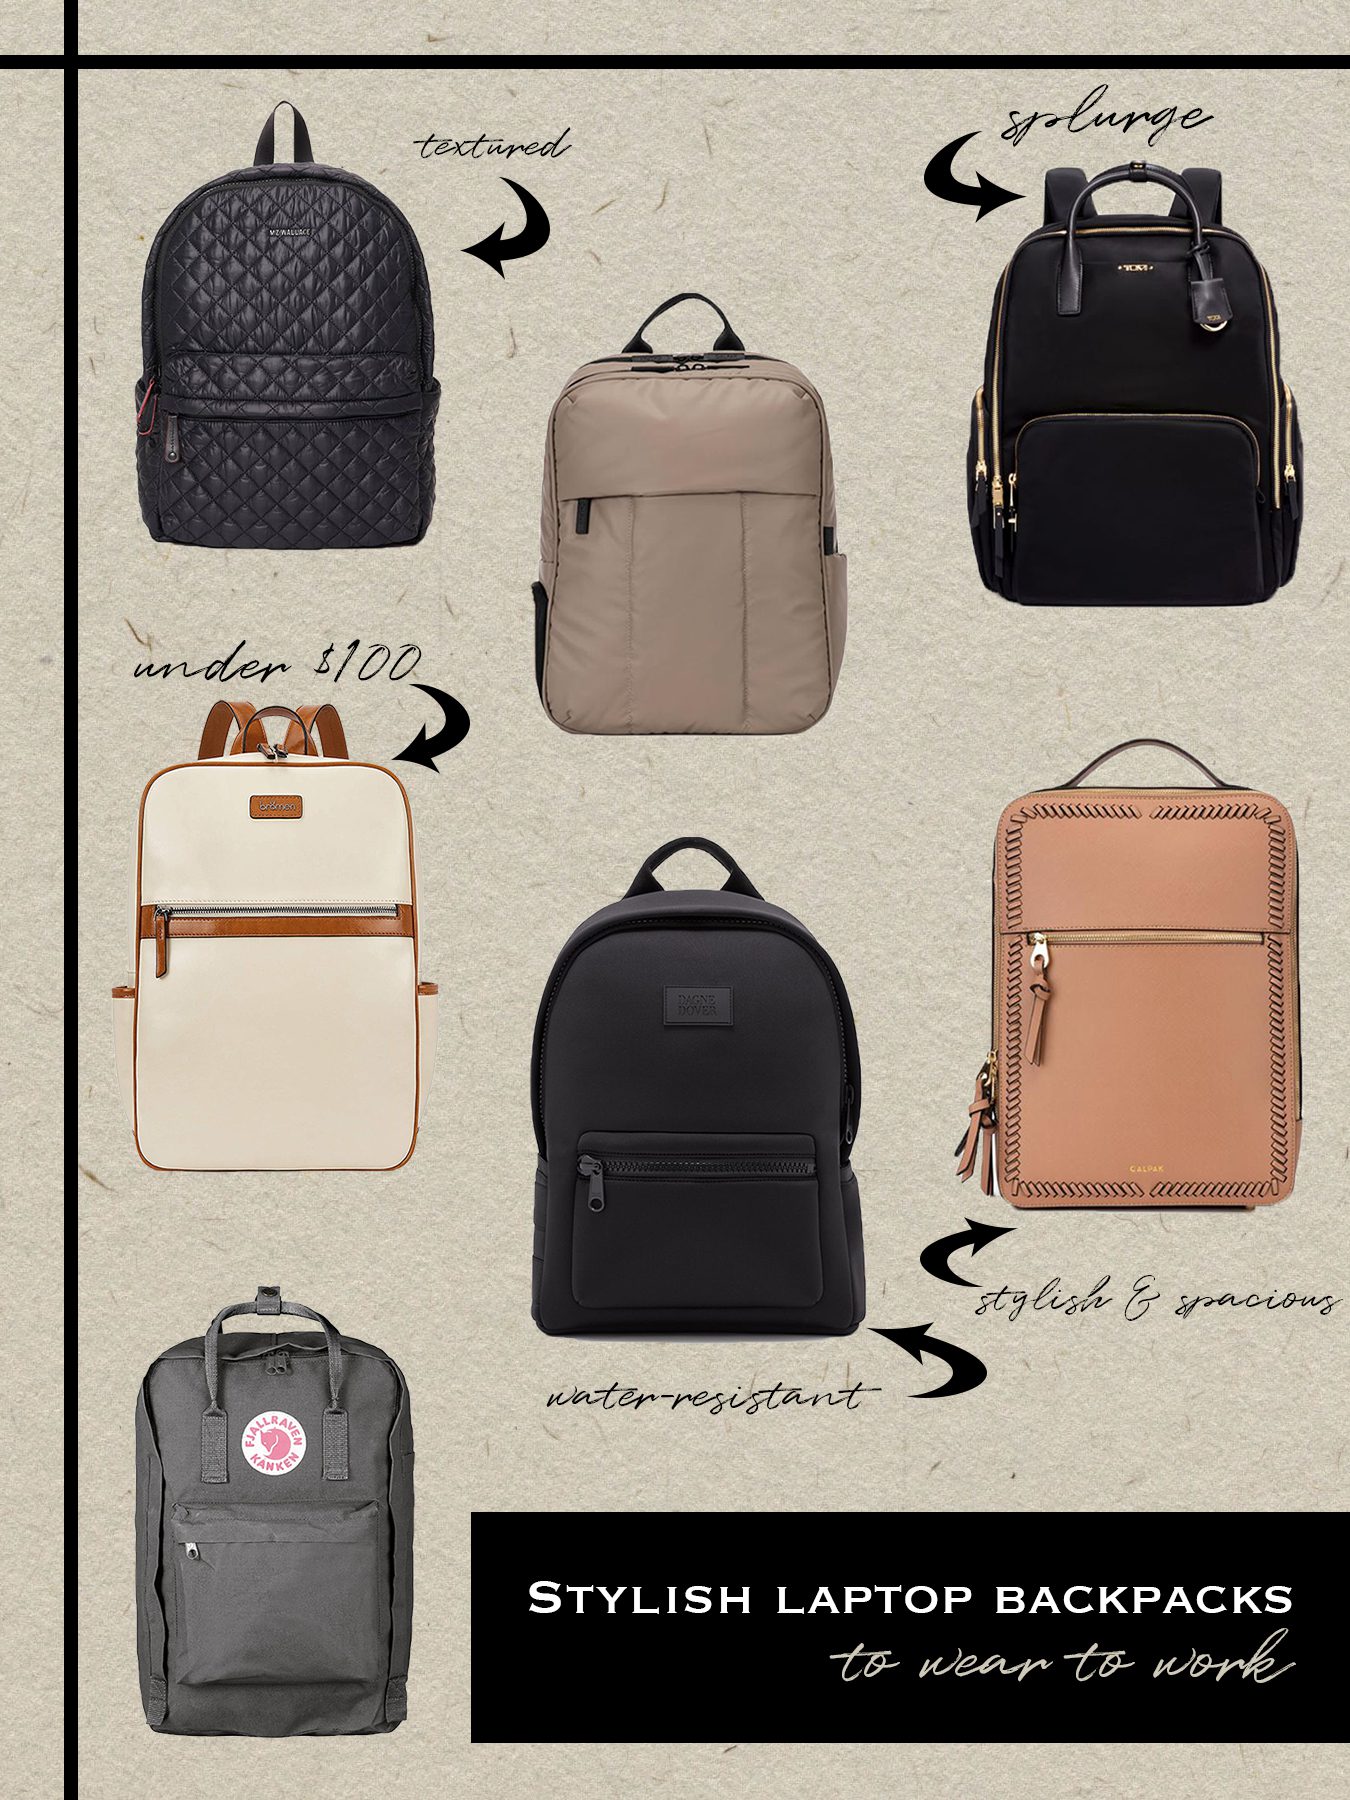 Laptop Backpacks for Women | LA fashion | Tea Cups and Tulips